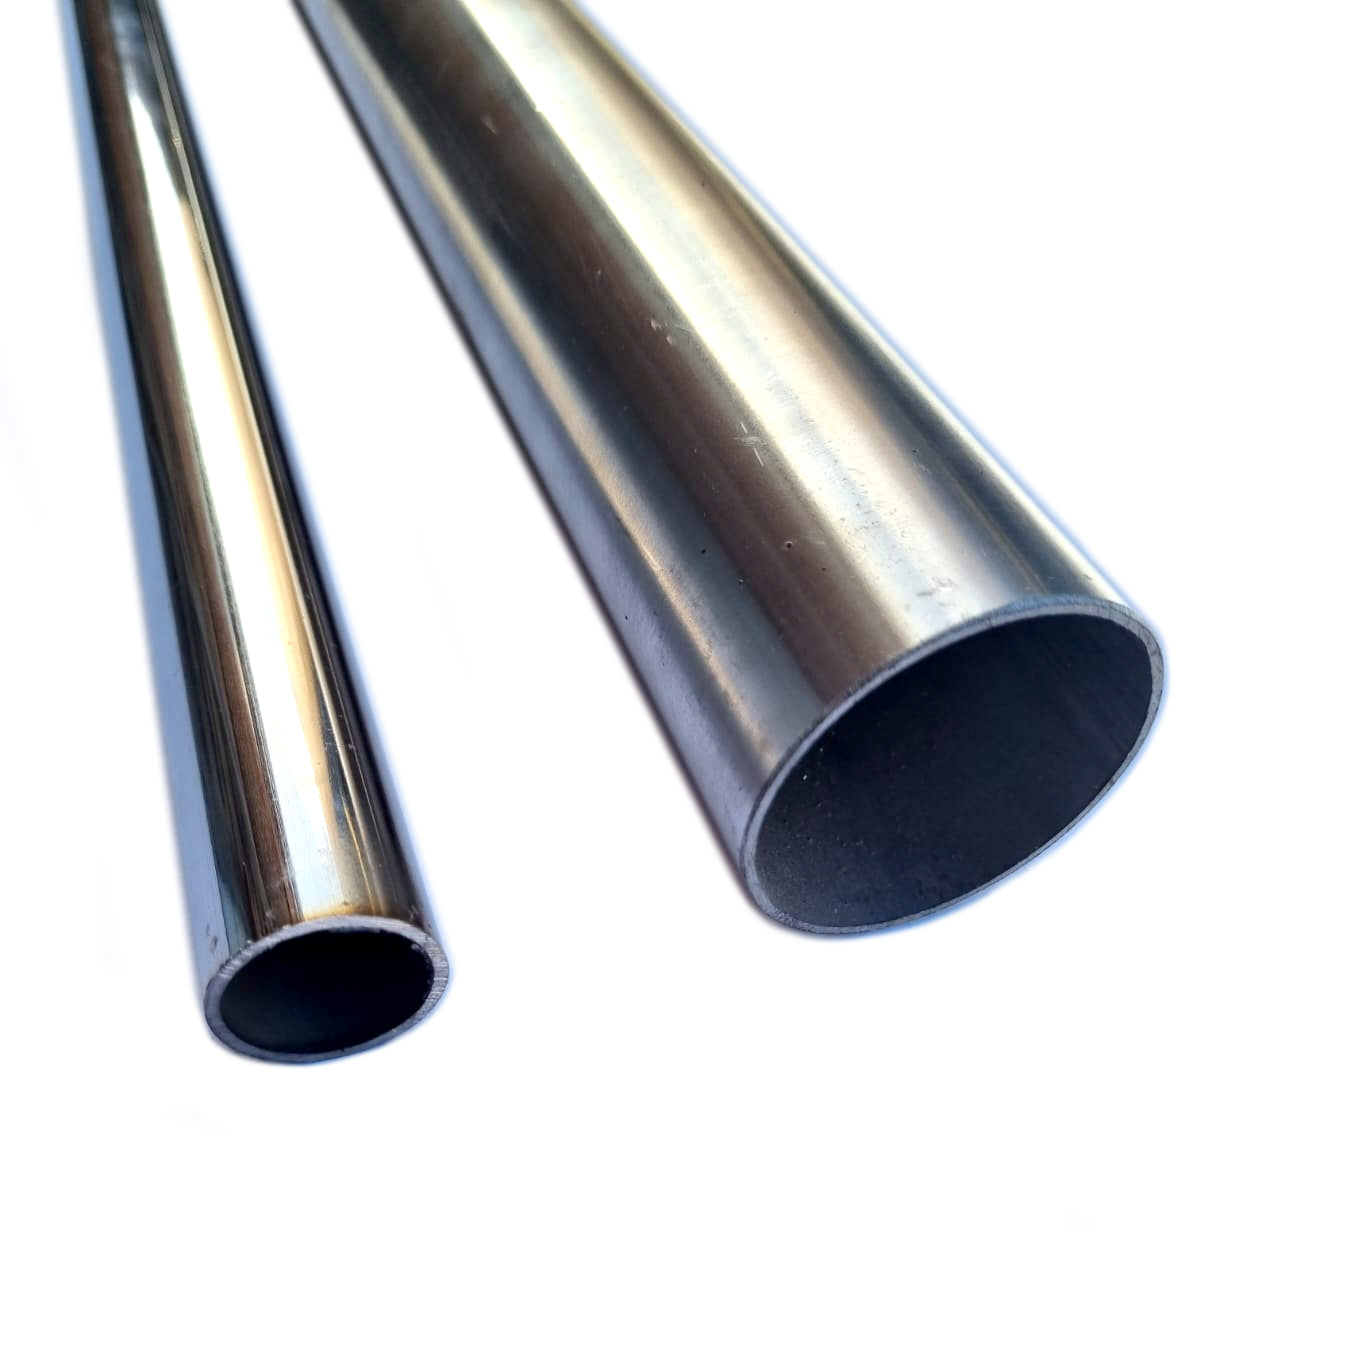 Stainless Steel Tube. Sizes: 25.4mm & 50.8mm. Shop Balustrade, Rail & Pipe Fittings online. Australia wide shipping. Chain.com.au